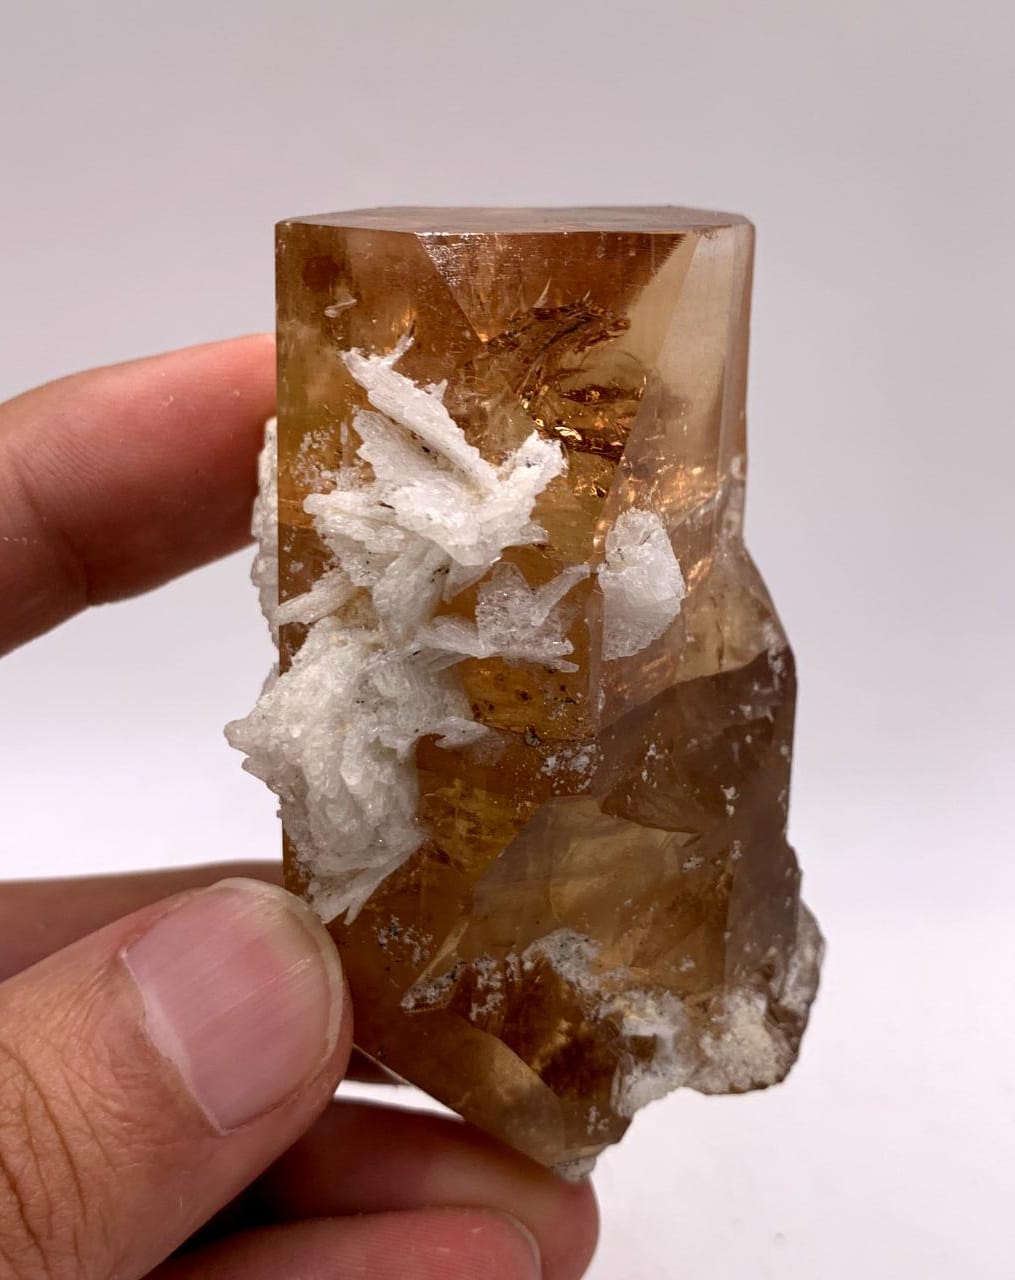 Saturated Color Gem Topaz With White Cleavelandite